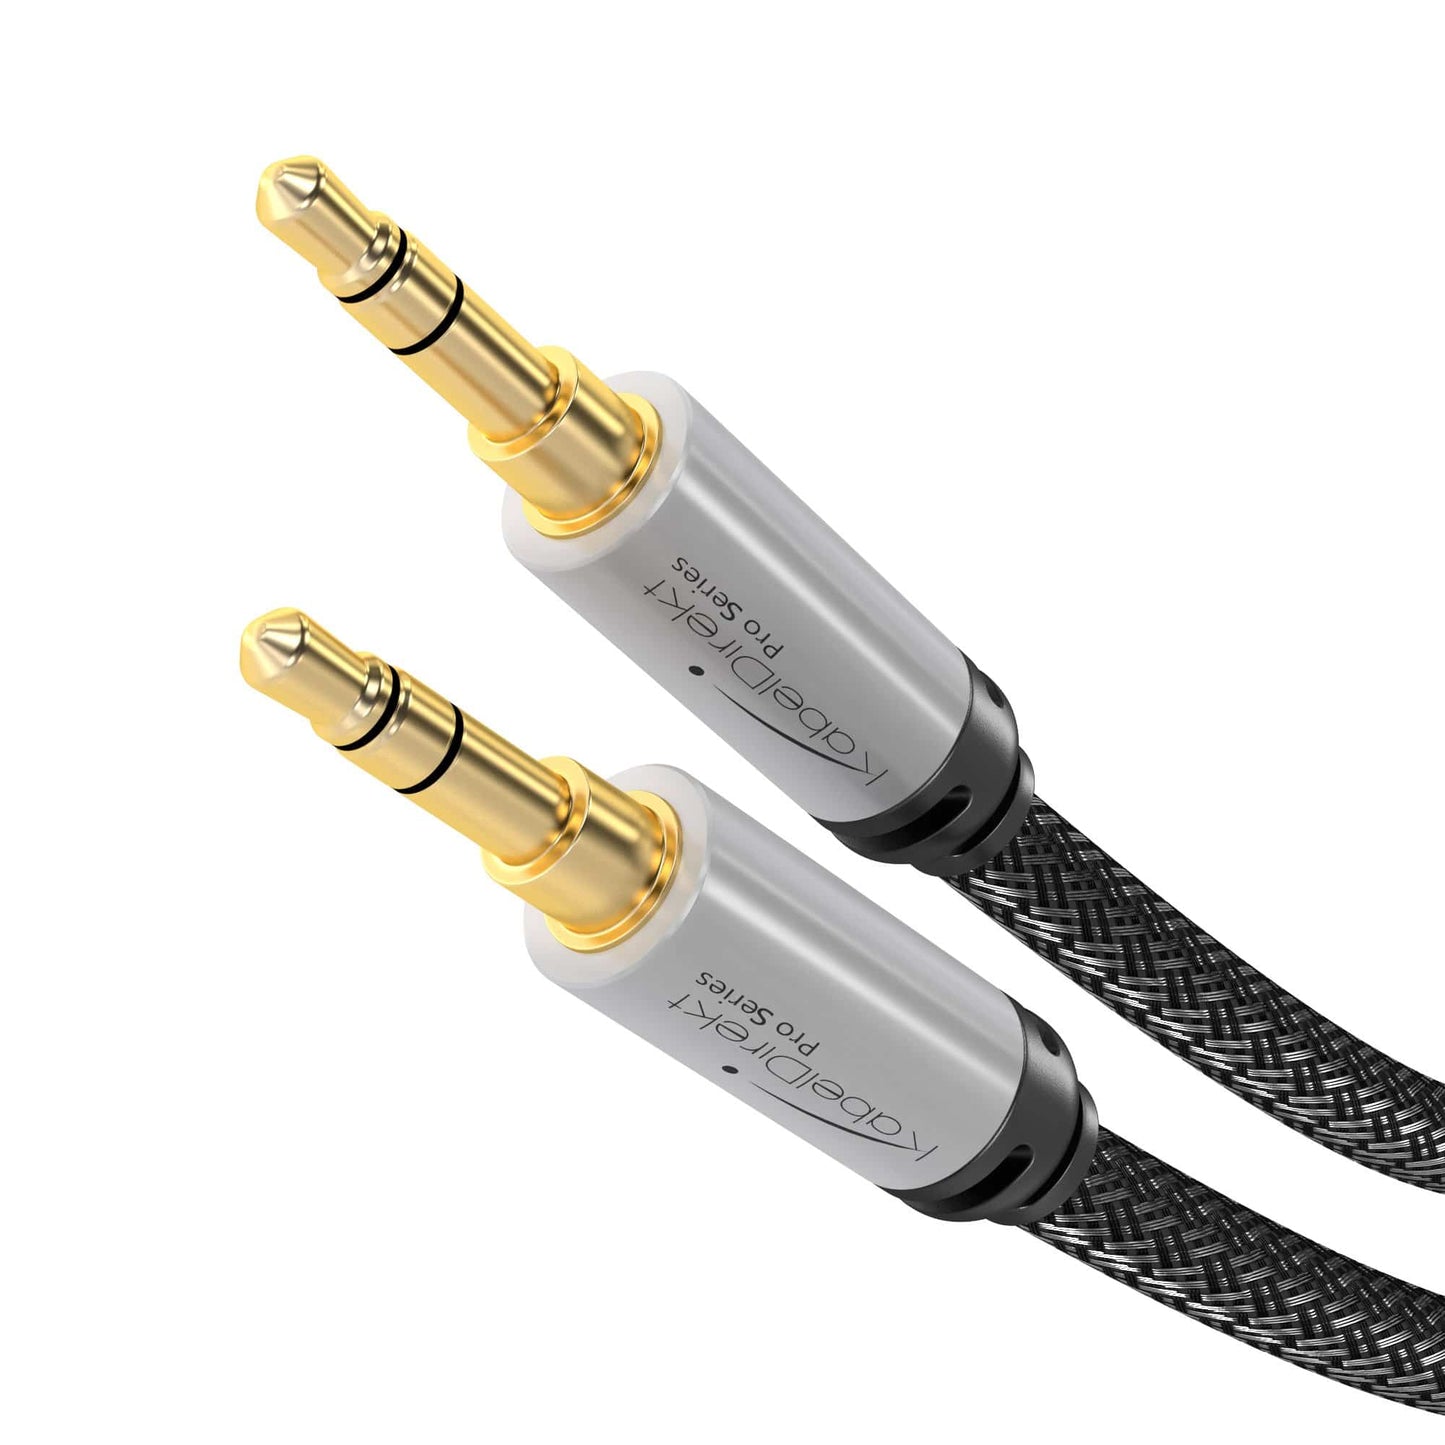 3.5mm aux headphone jack cable with metal casing - for smartphones & tablets, notebooks & laptops, cars